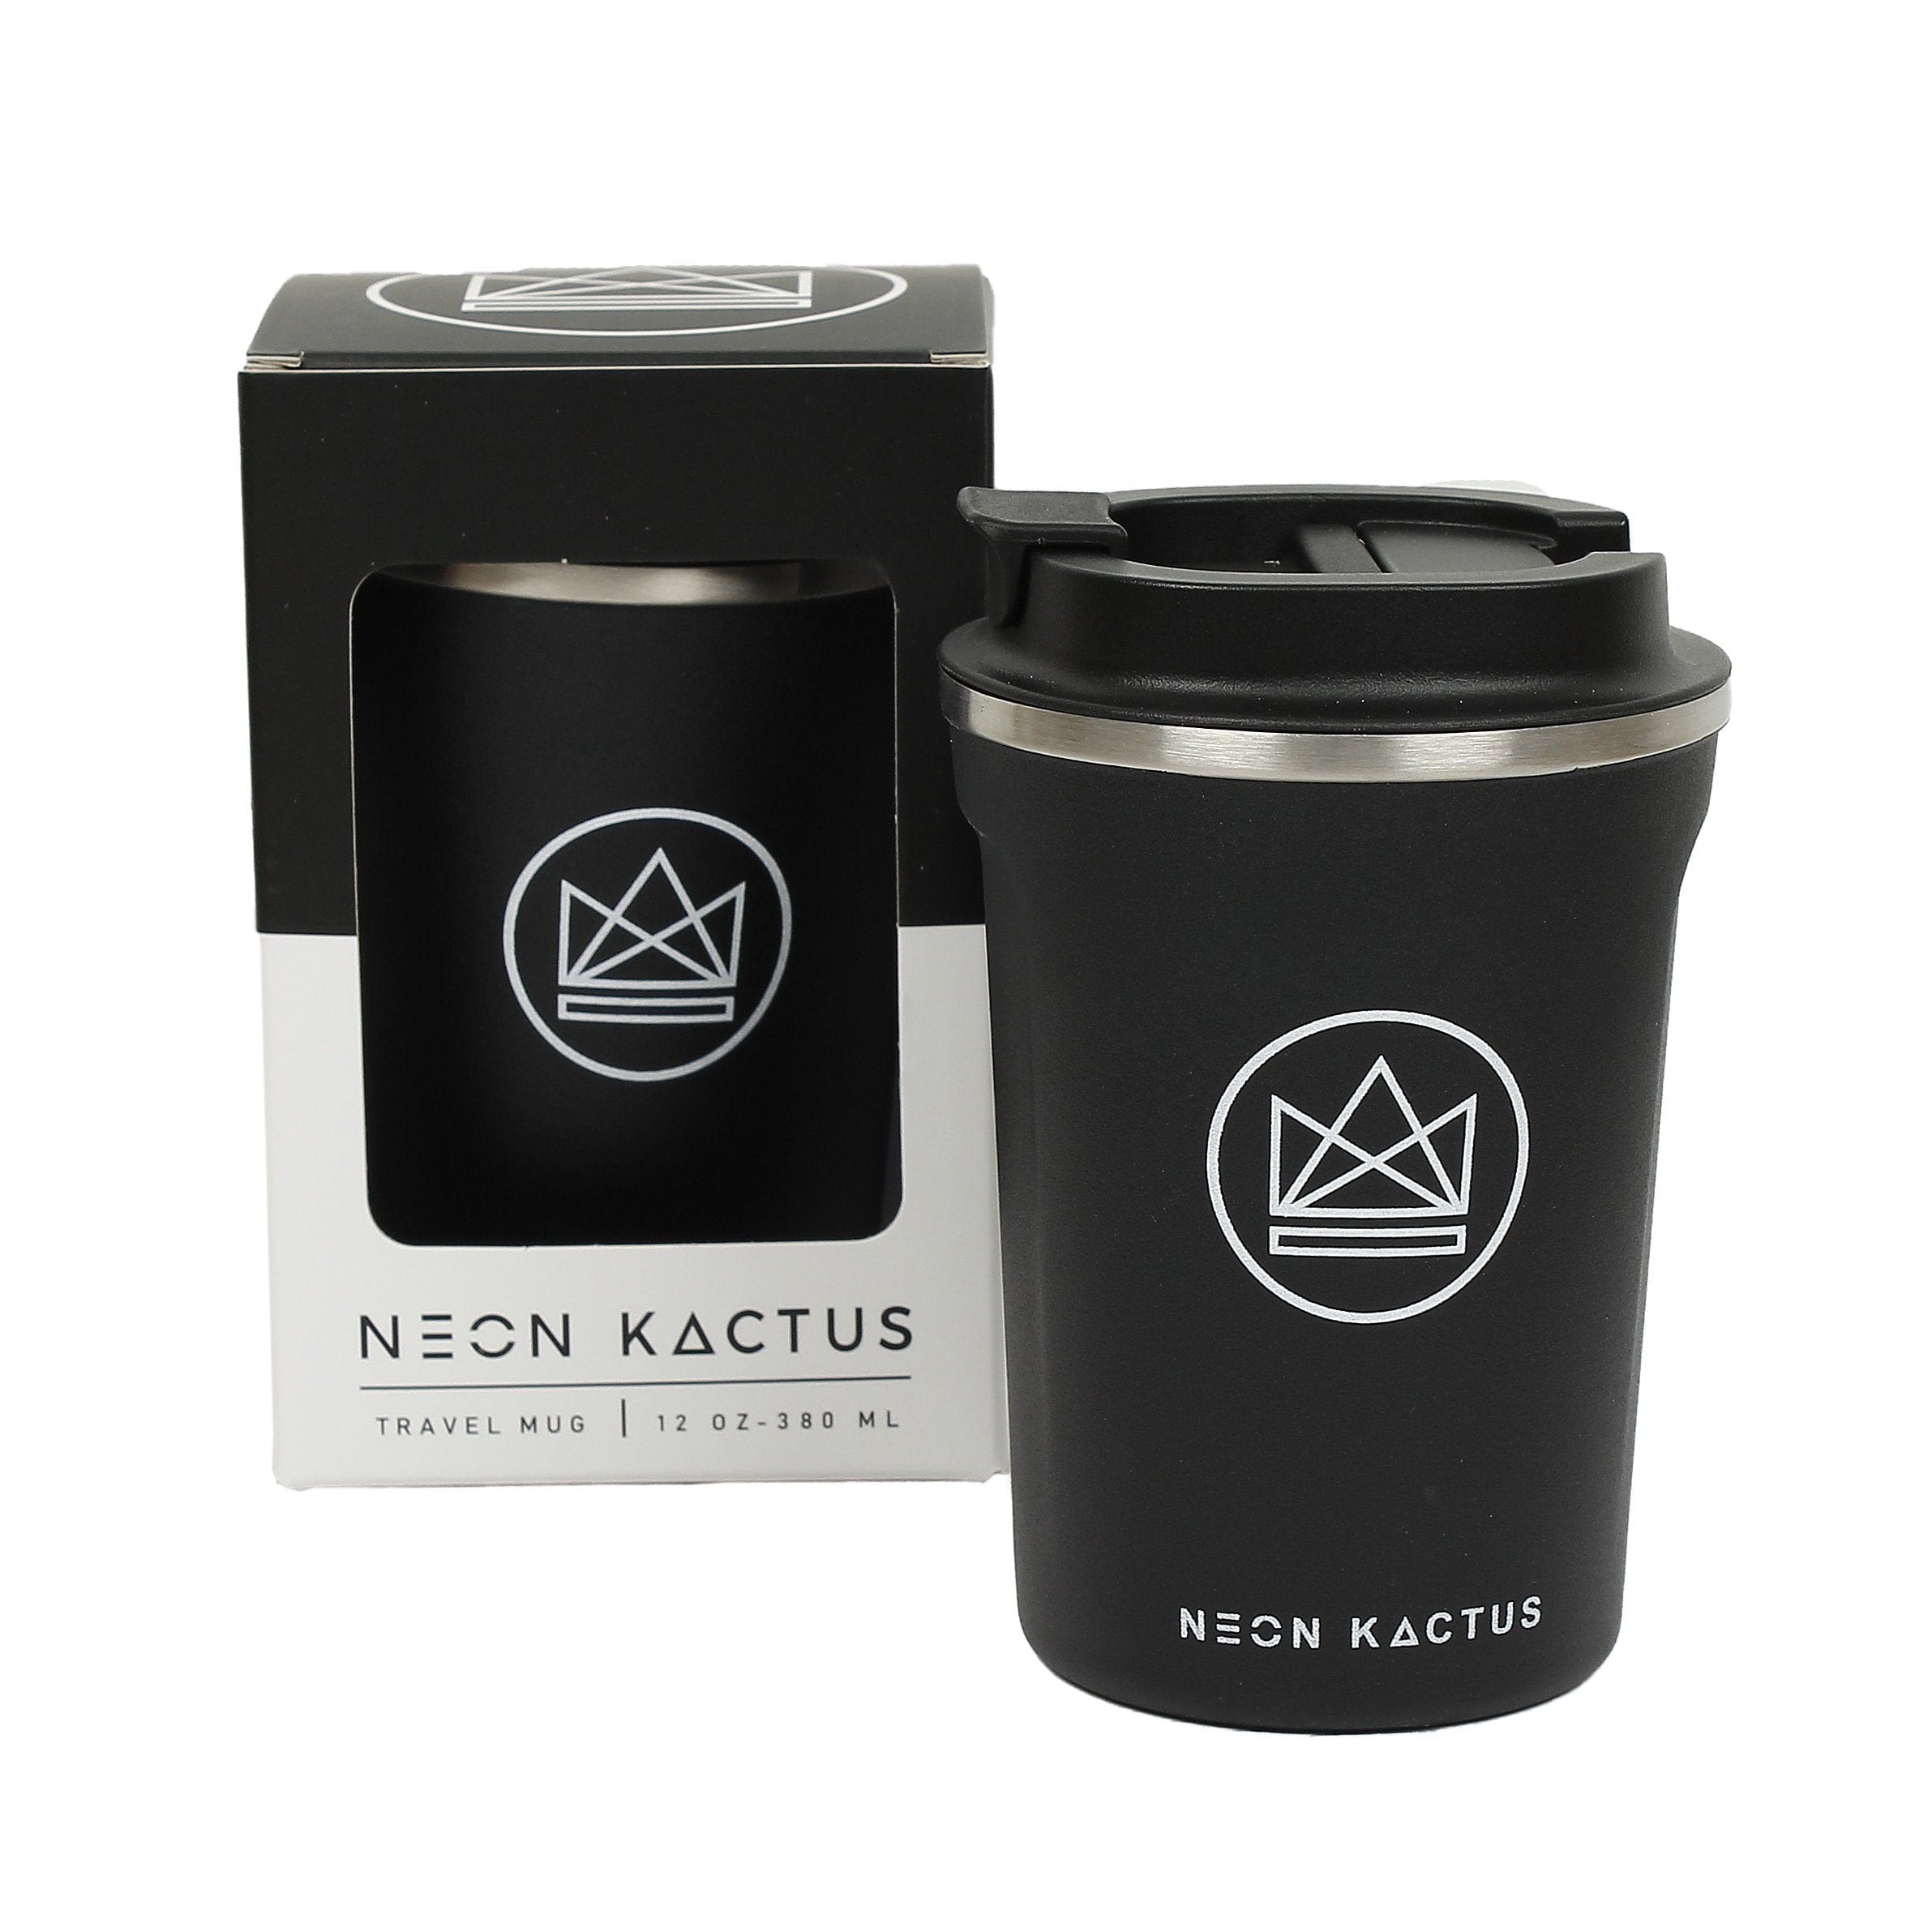 Neon Kactus - Double-Walled Coffee Cup, Reusable Coffee Cup with